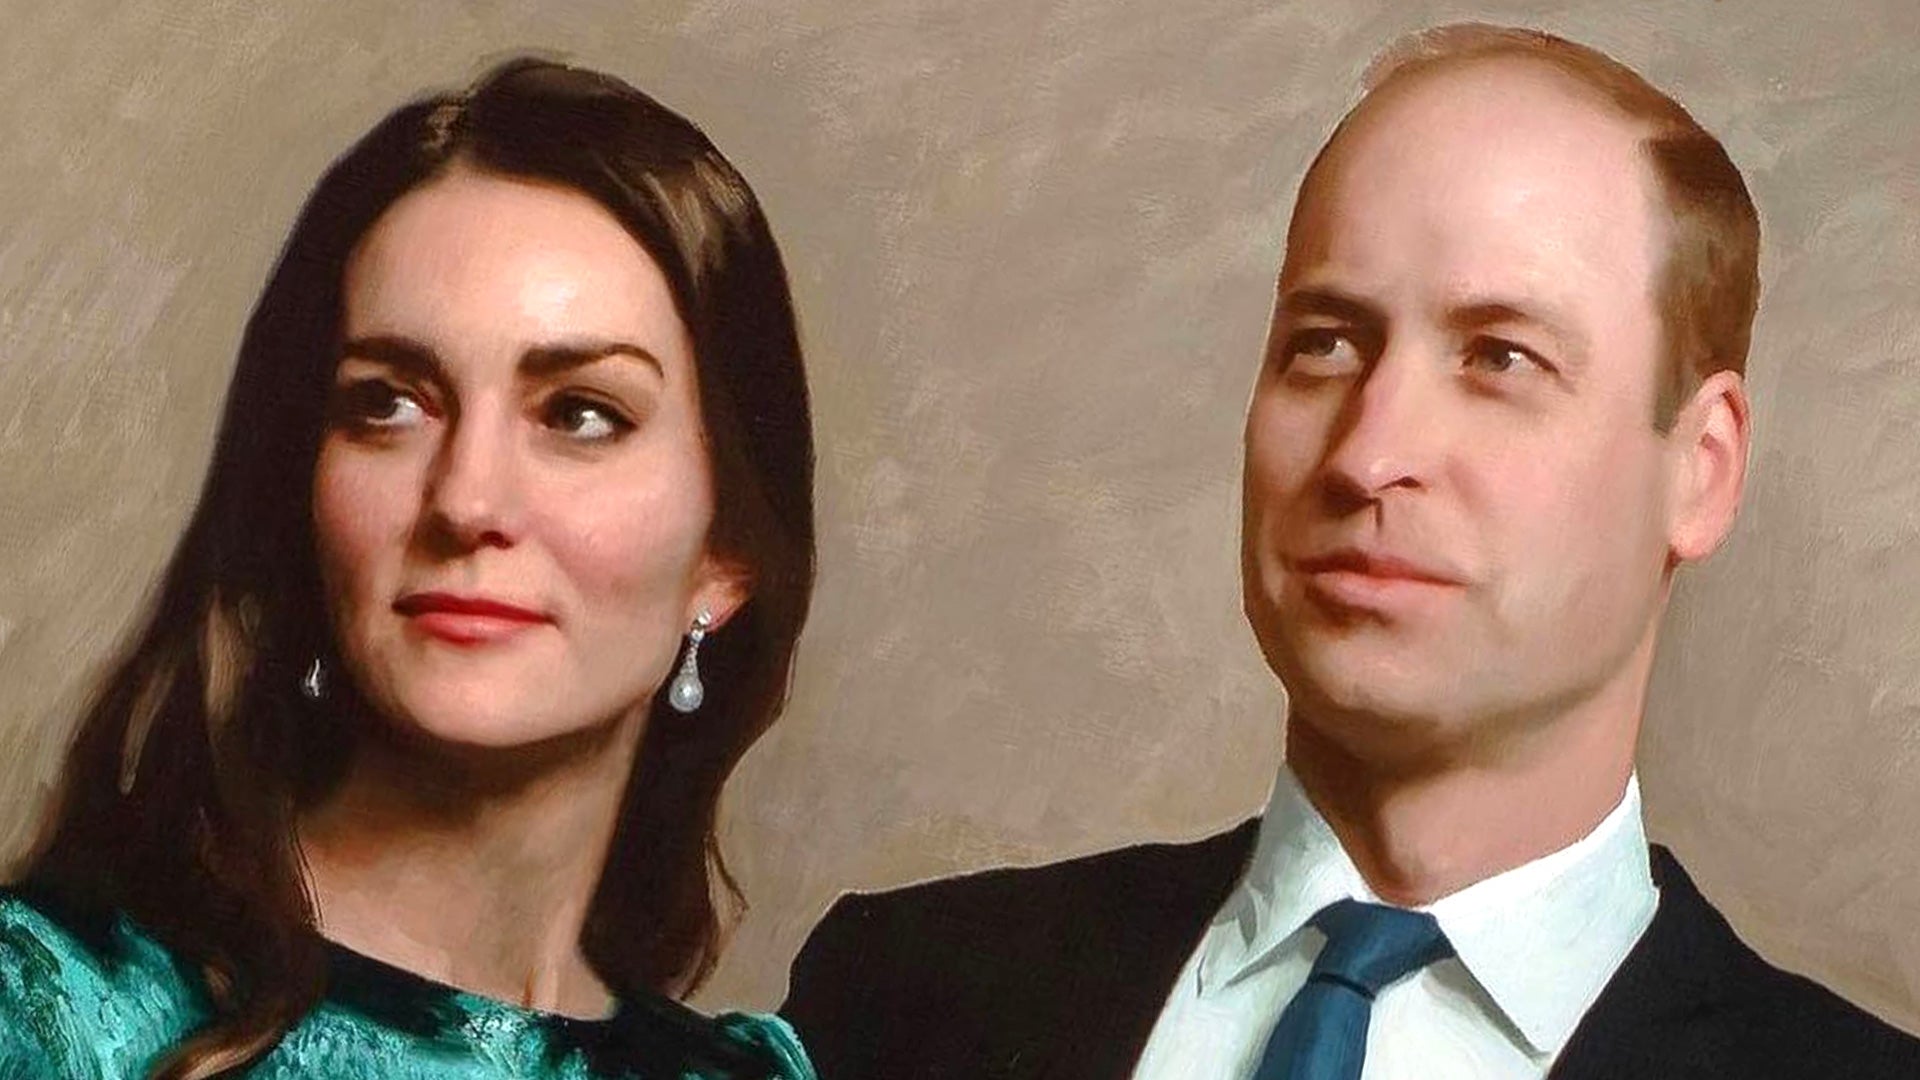 Prince William and Kate Middleton React to Their First Official Joint Portrait